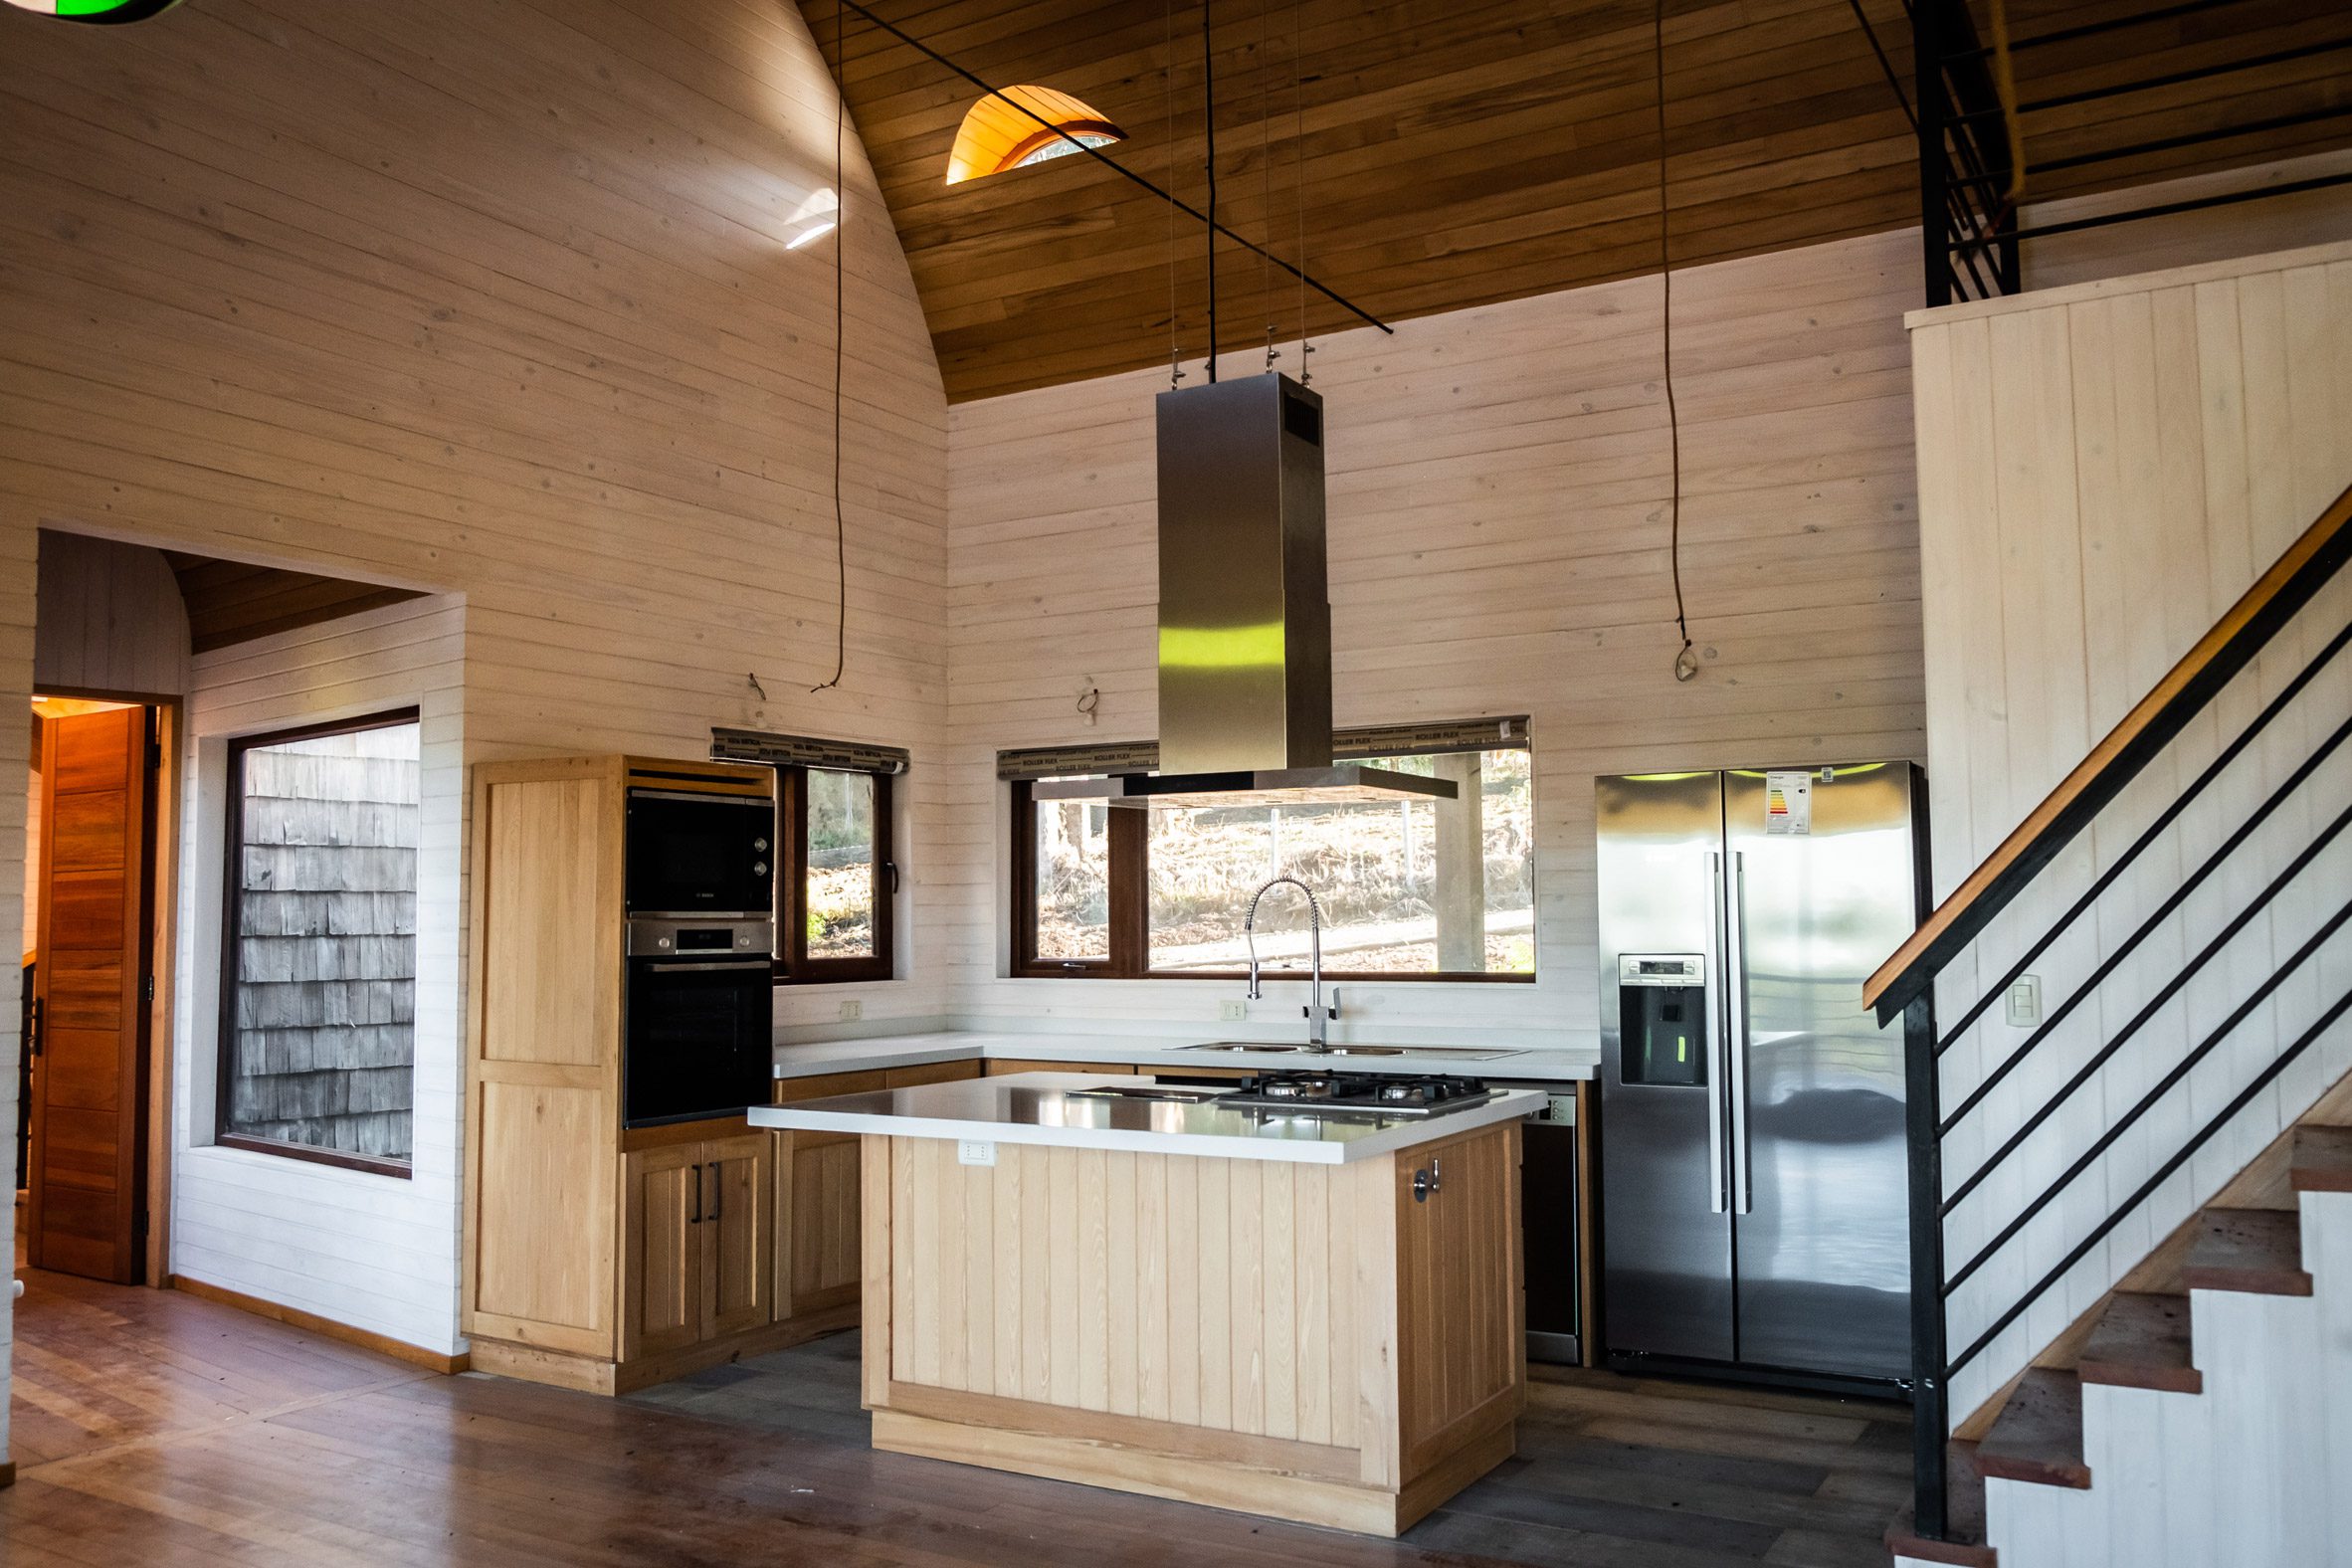 Wooden kitchen in the vaulted house